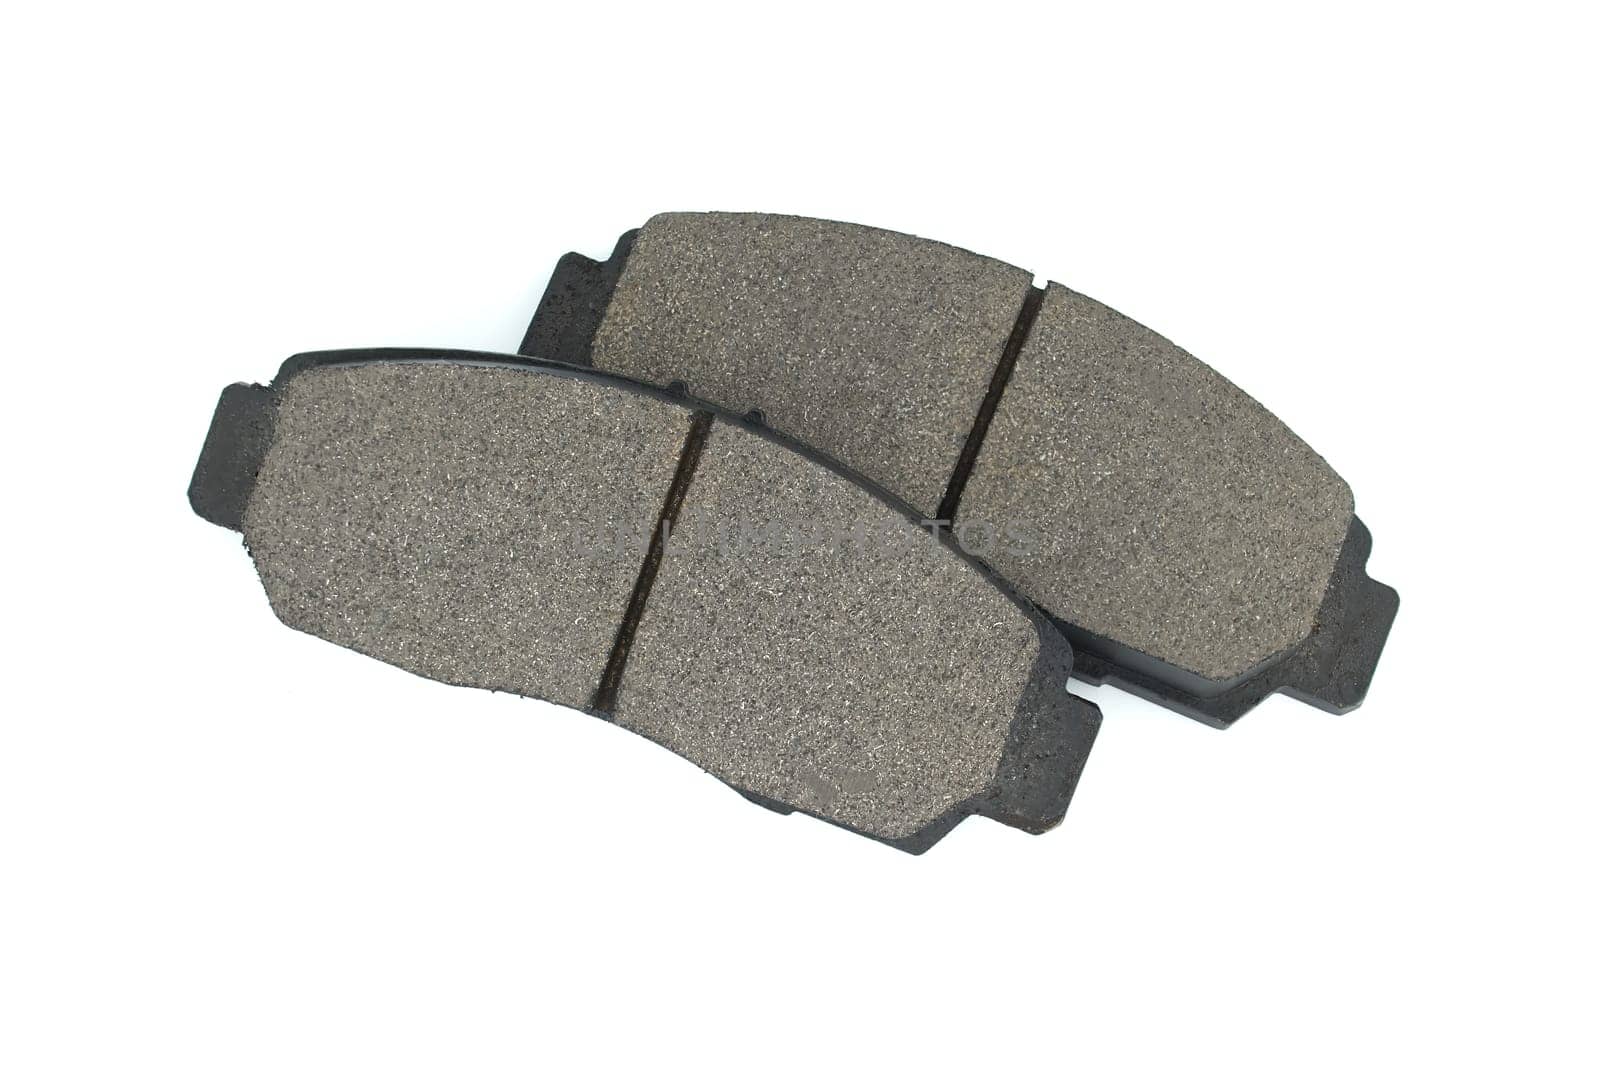 Set of auto brake pads isolated on white background, brake parts, replacement parts for vehicle